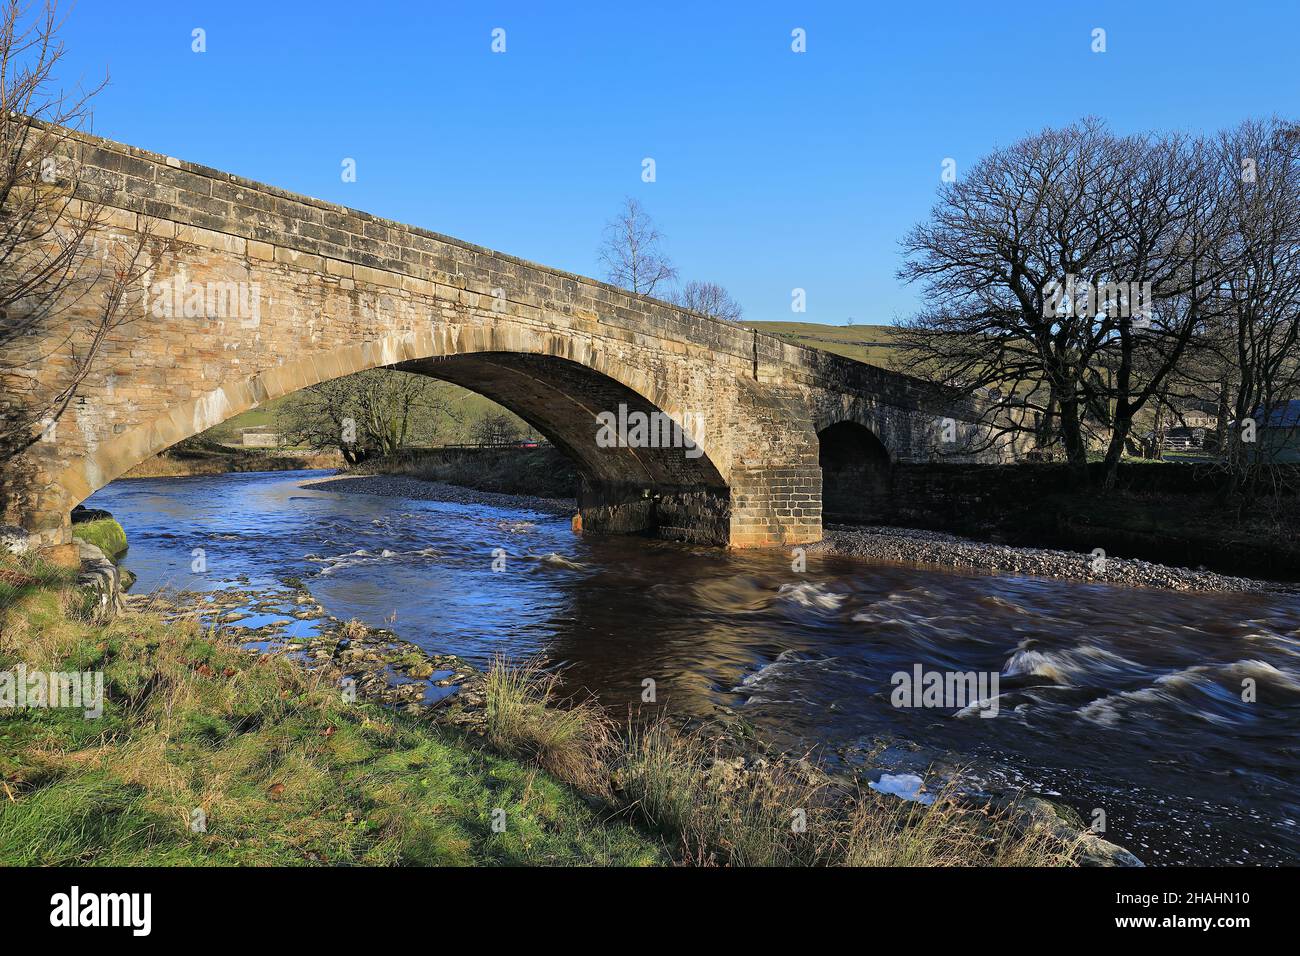 A stone bridge over the River Wharfe, at Kettlewell in Upper-Wharfedale, Yorkshire Dales National Park. Stock Photo